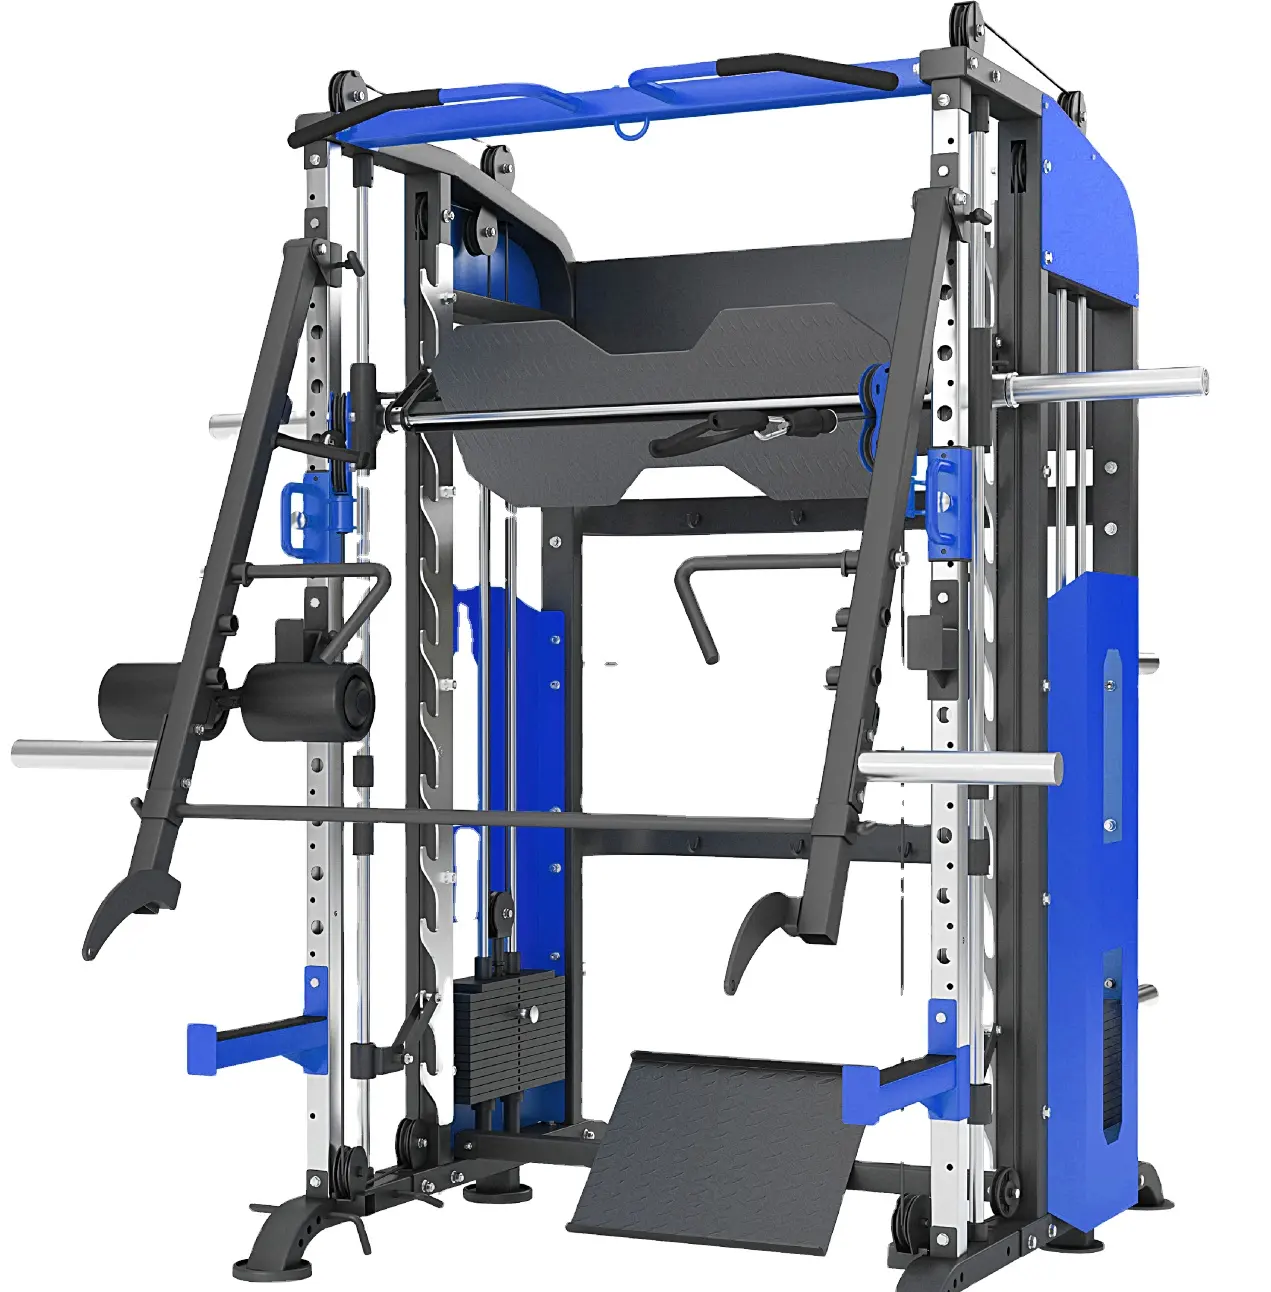 Cross Over Training Squat Fitness Rack Cage Equipment Station Home Smith Machine Multifunctional Gym